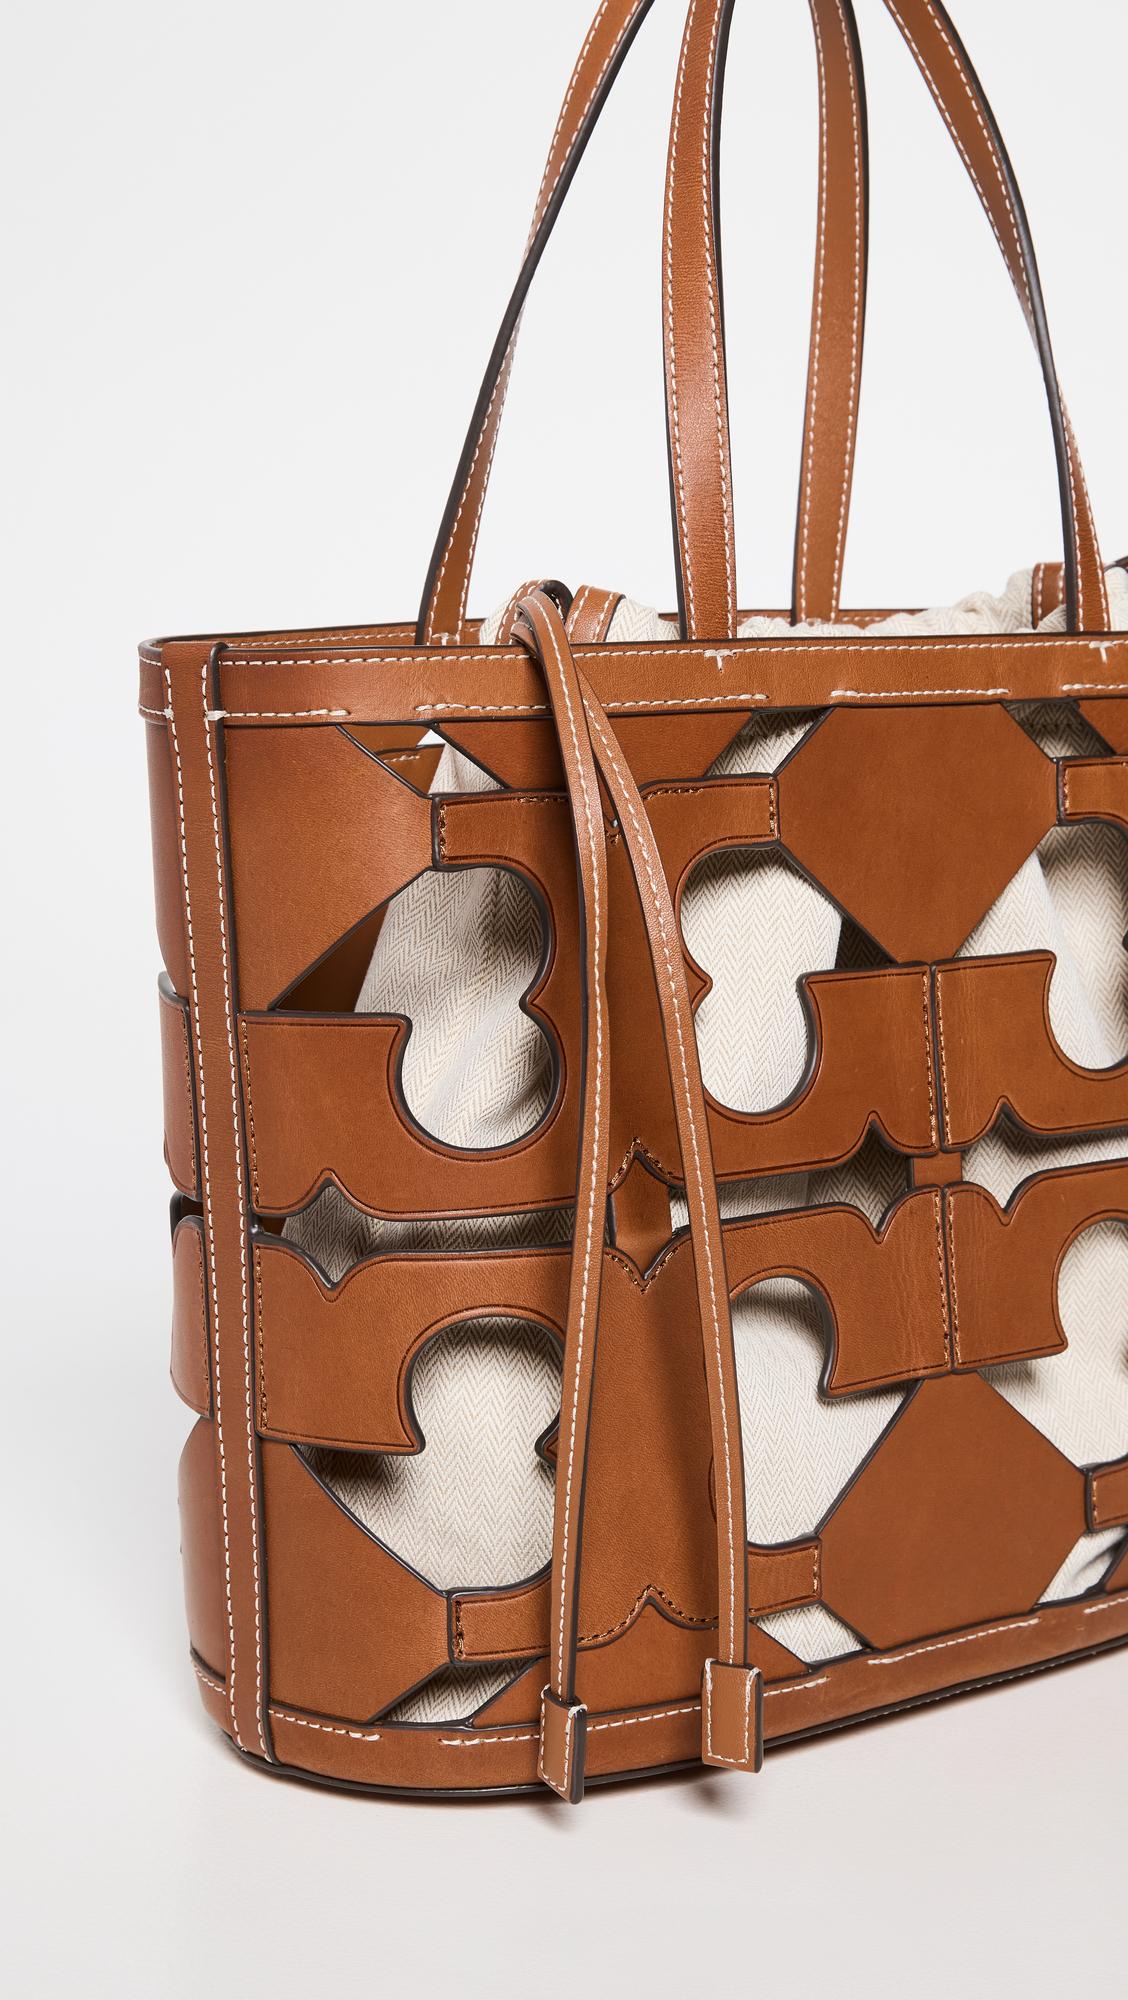 Leather Cutout Tote in Brown - Tory Burch